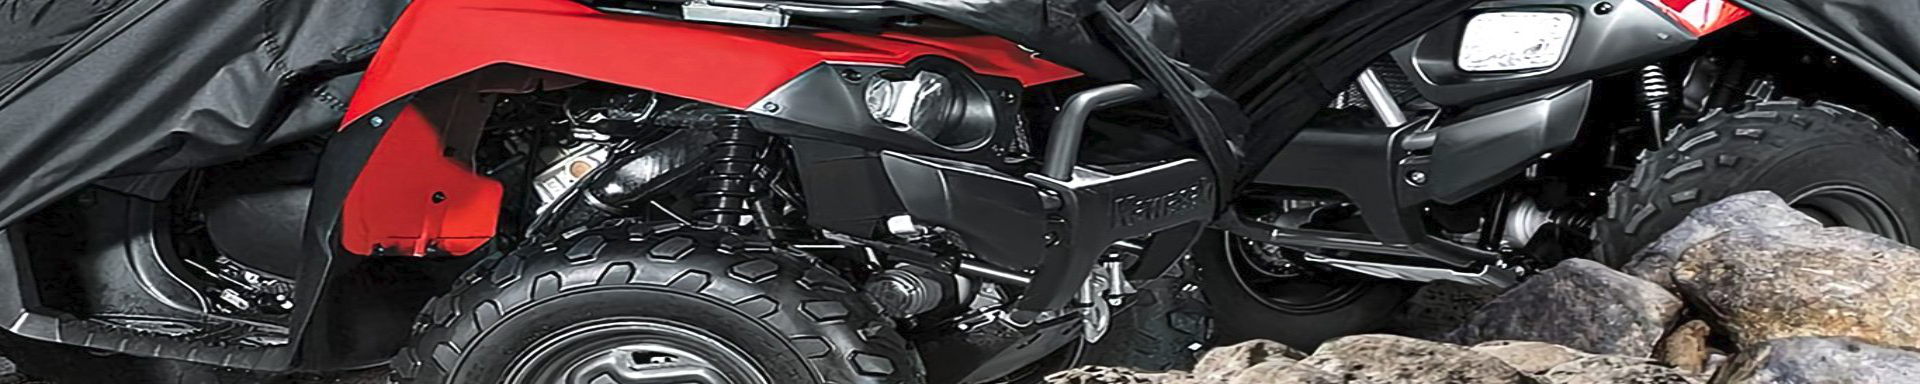 Covers | MunroPowersports.com | Munro Industries mp-1008030106